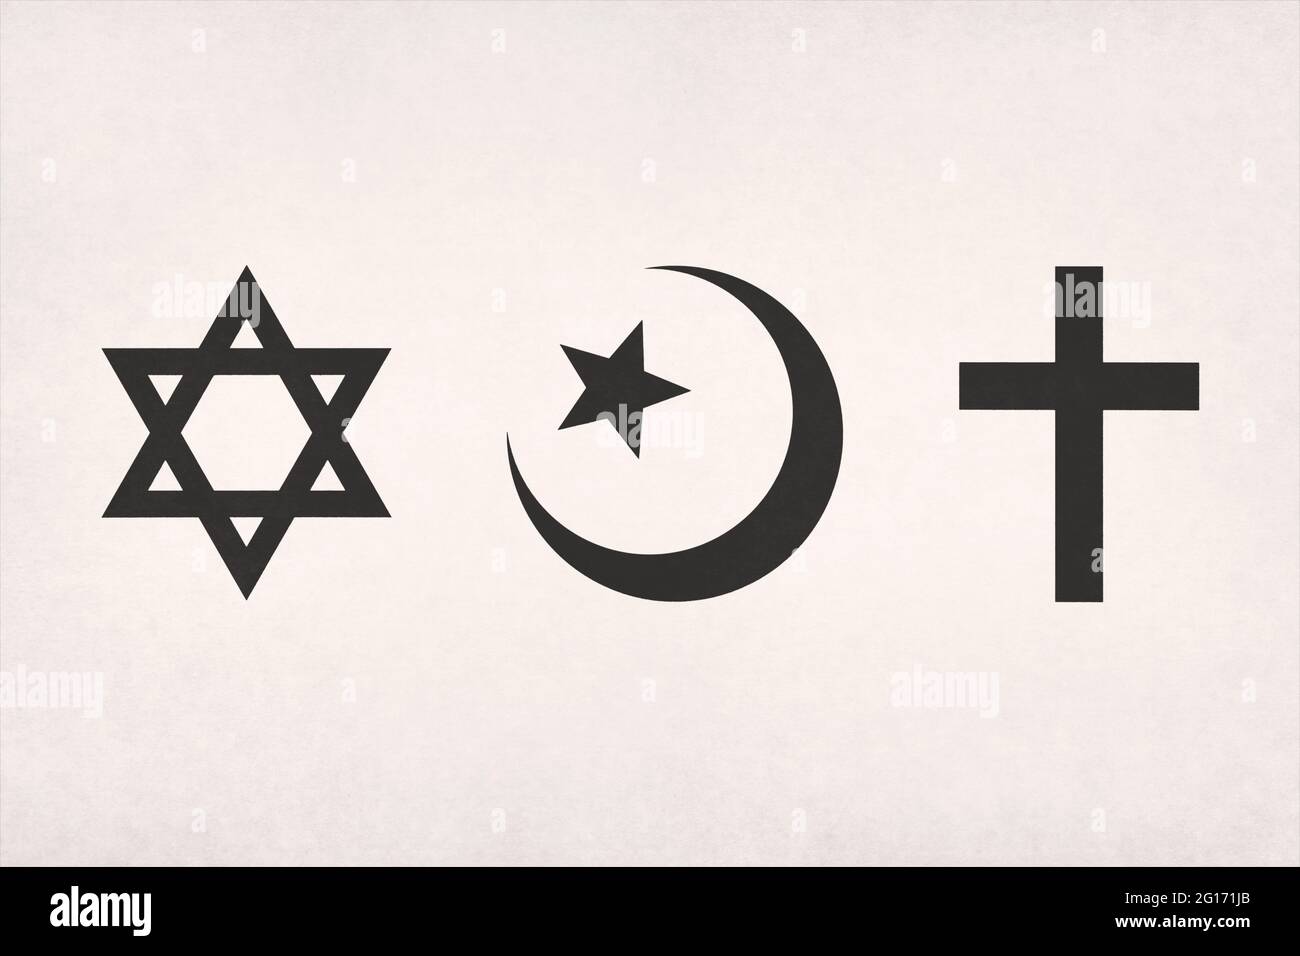 The Abrahamic symbols (Judaism, Islam and Christianity) printed on paper. Stock Photo